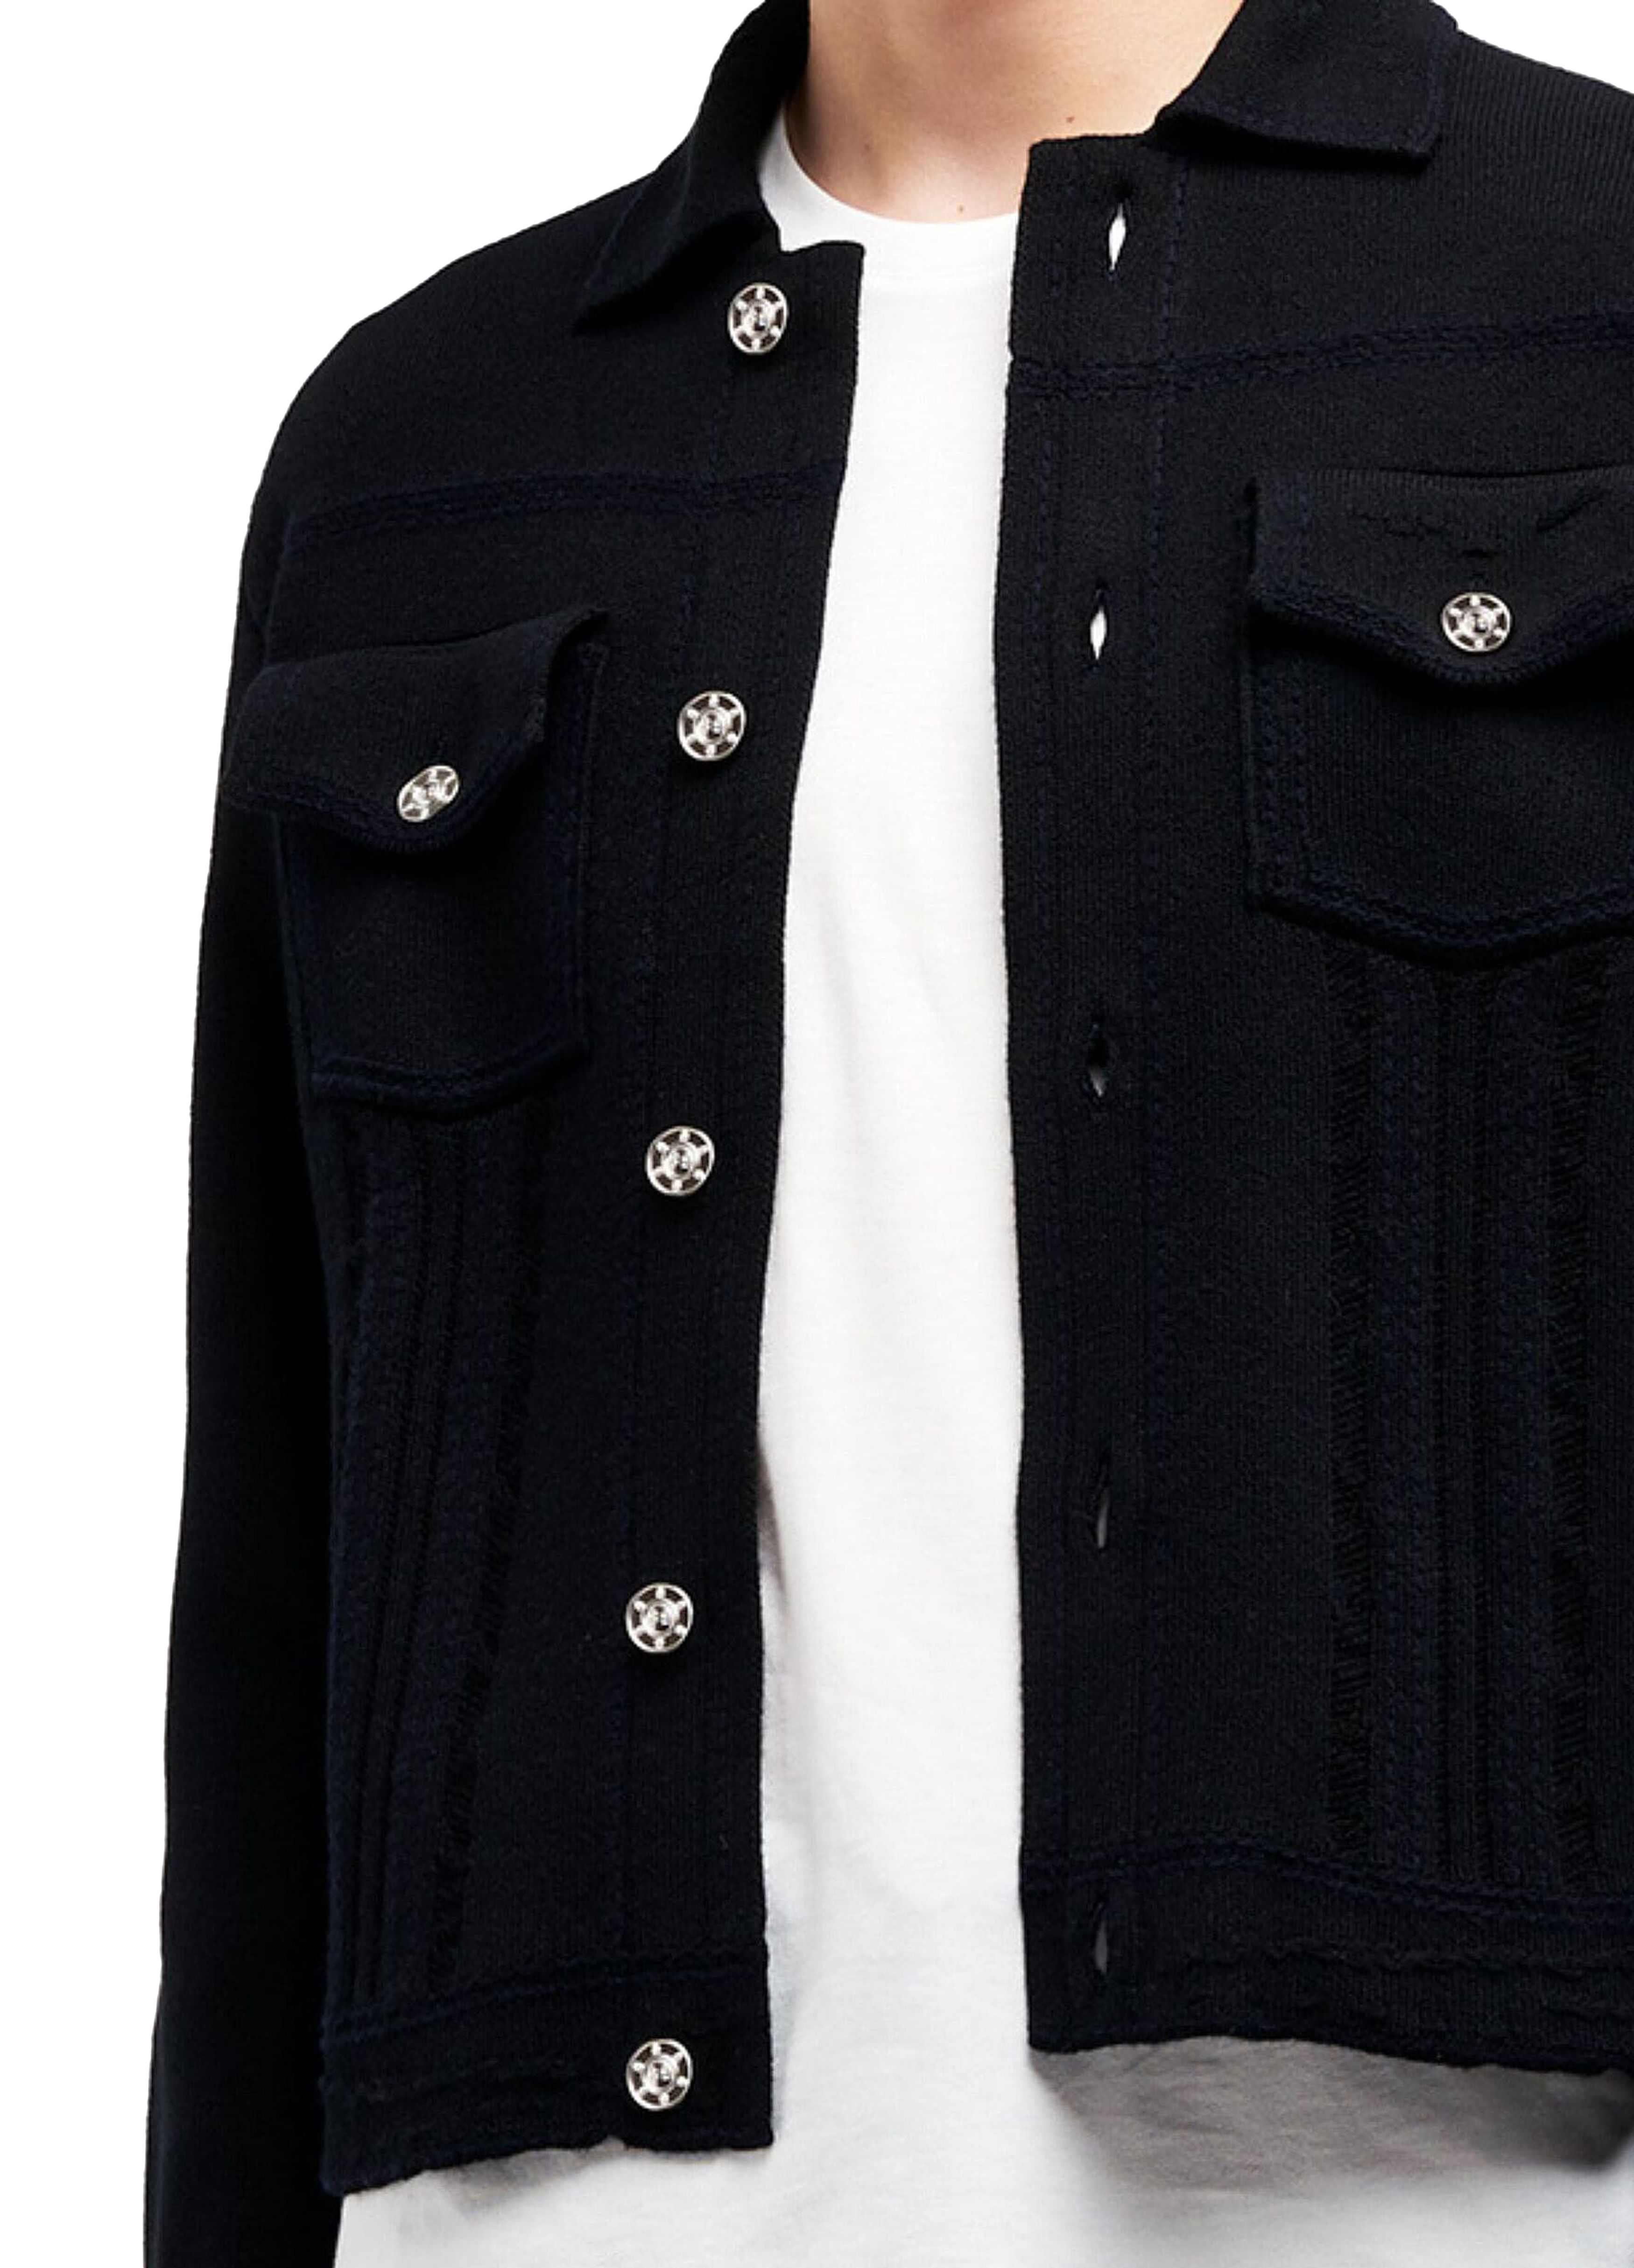 Barrie Denim cashmere and cotton jacket